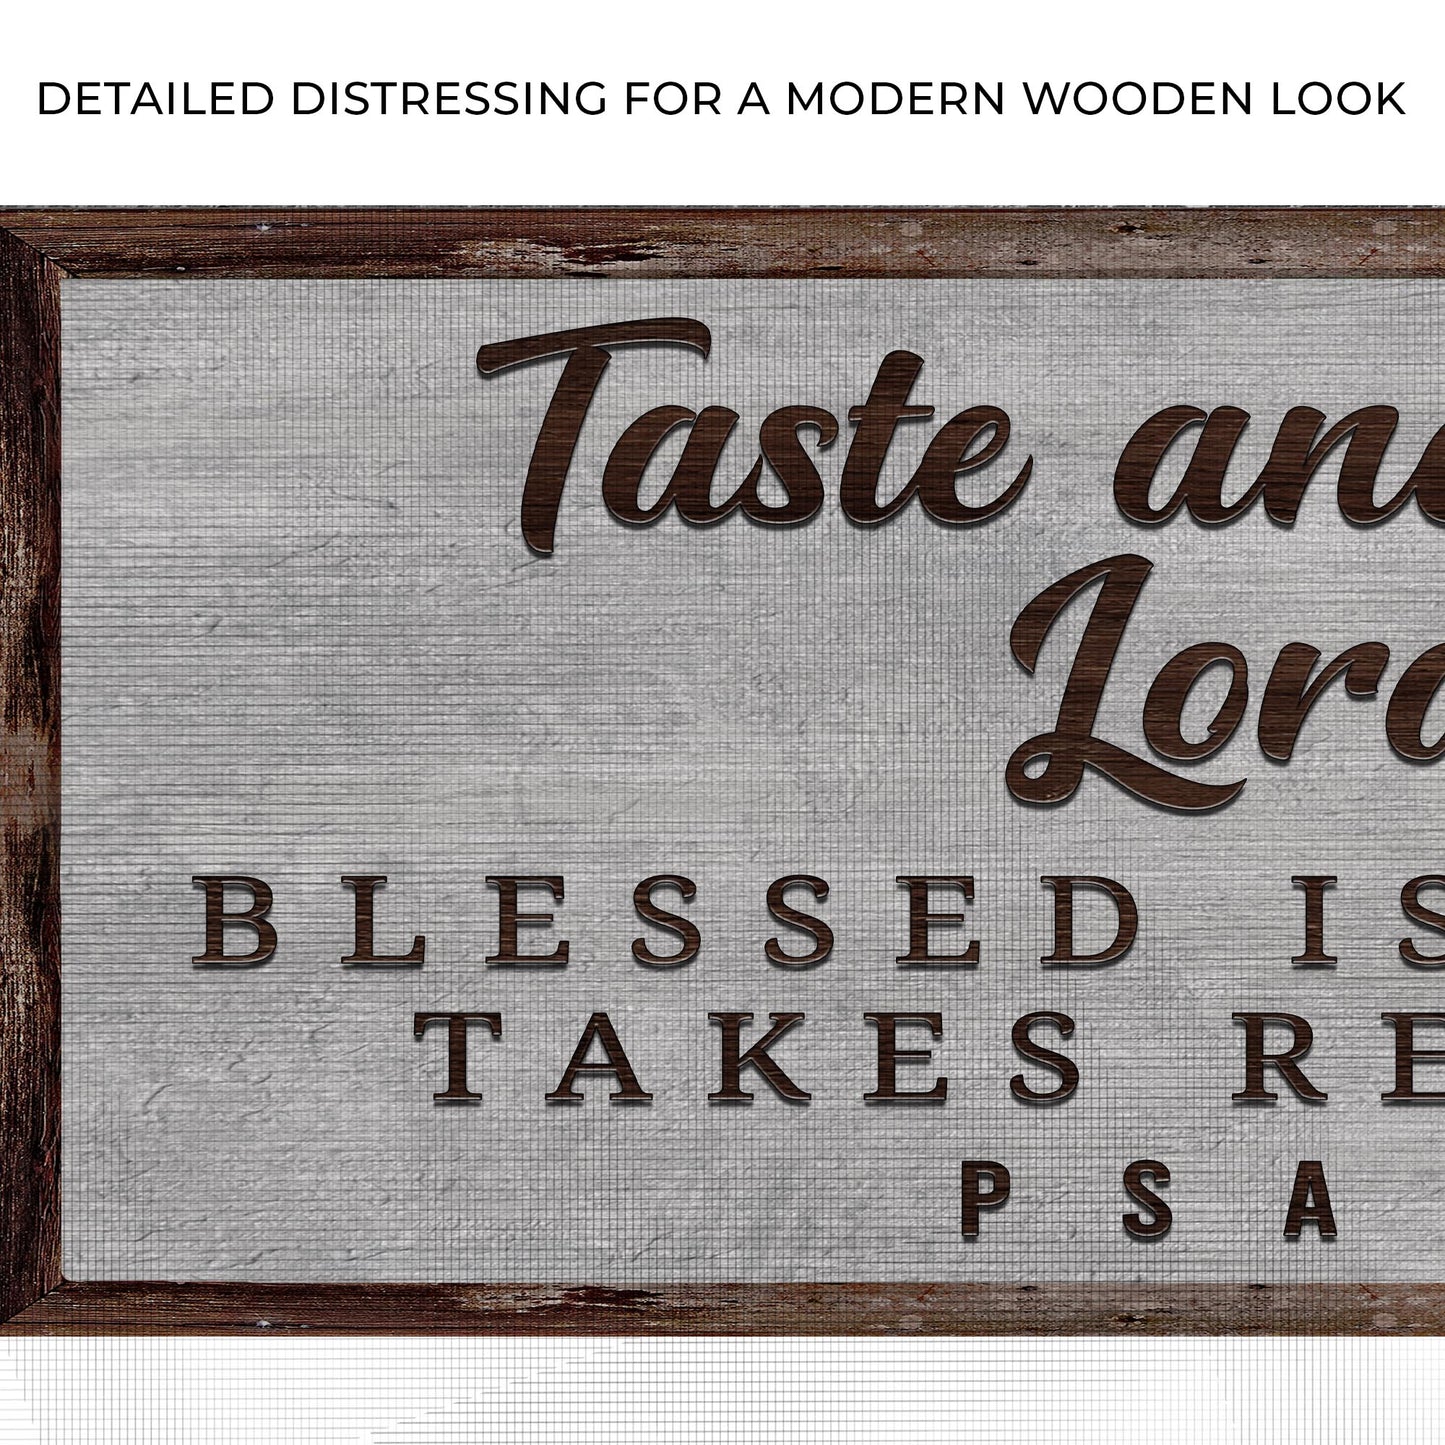 Psalm 34:8 - Taste and See that the Lord is good Sign (Free Shipping)